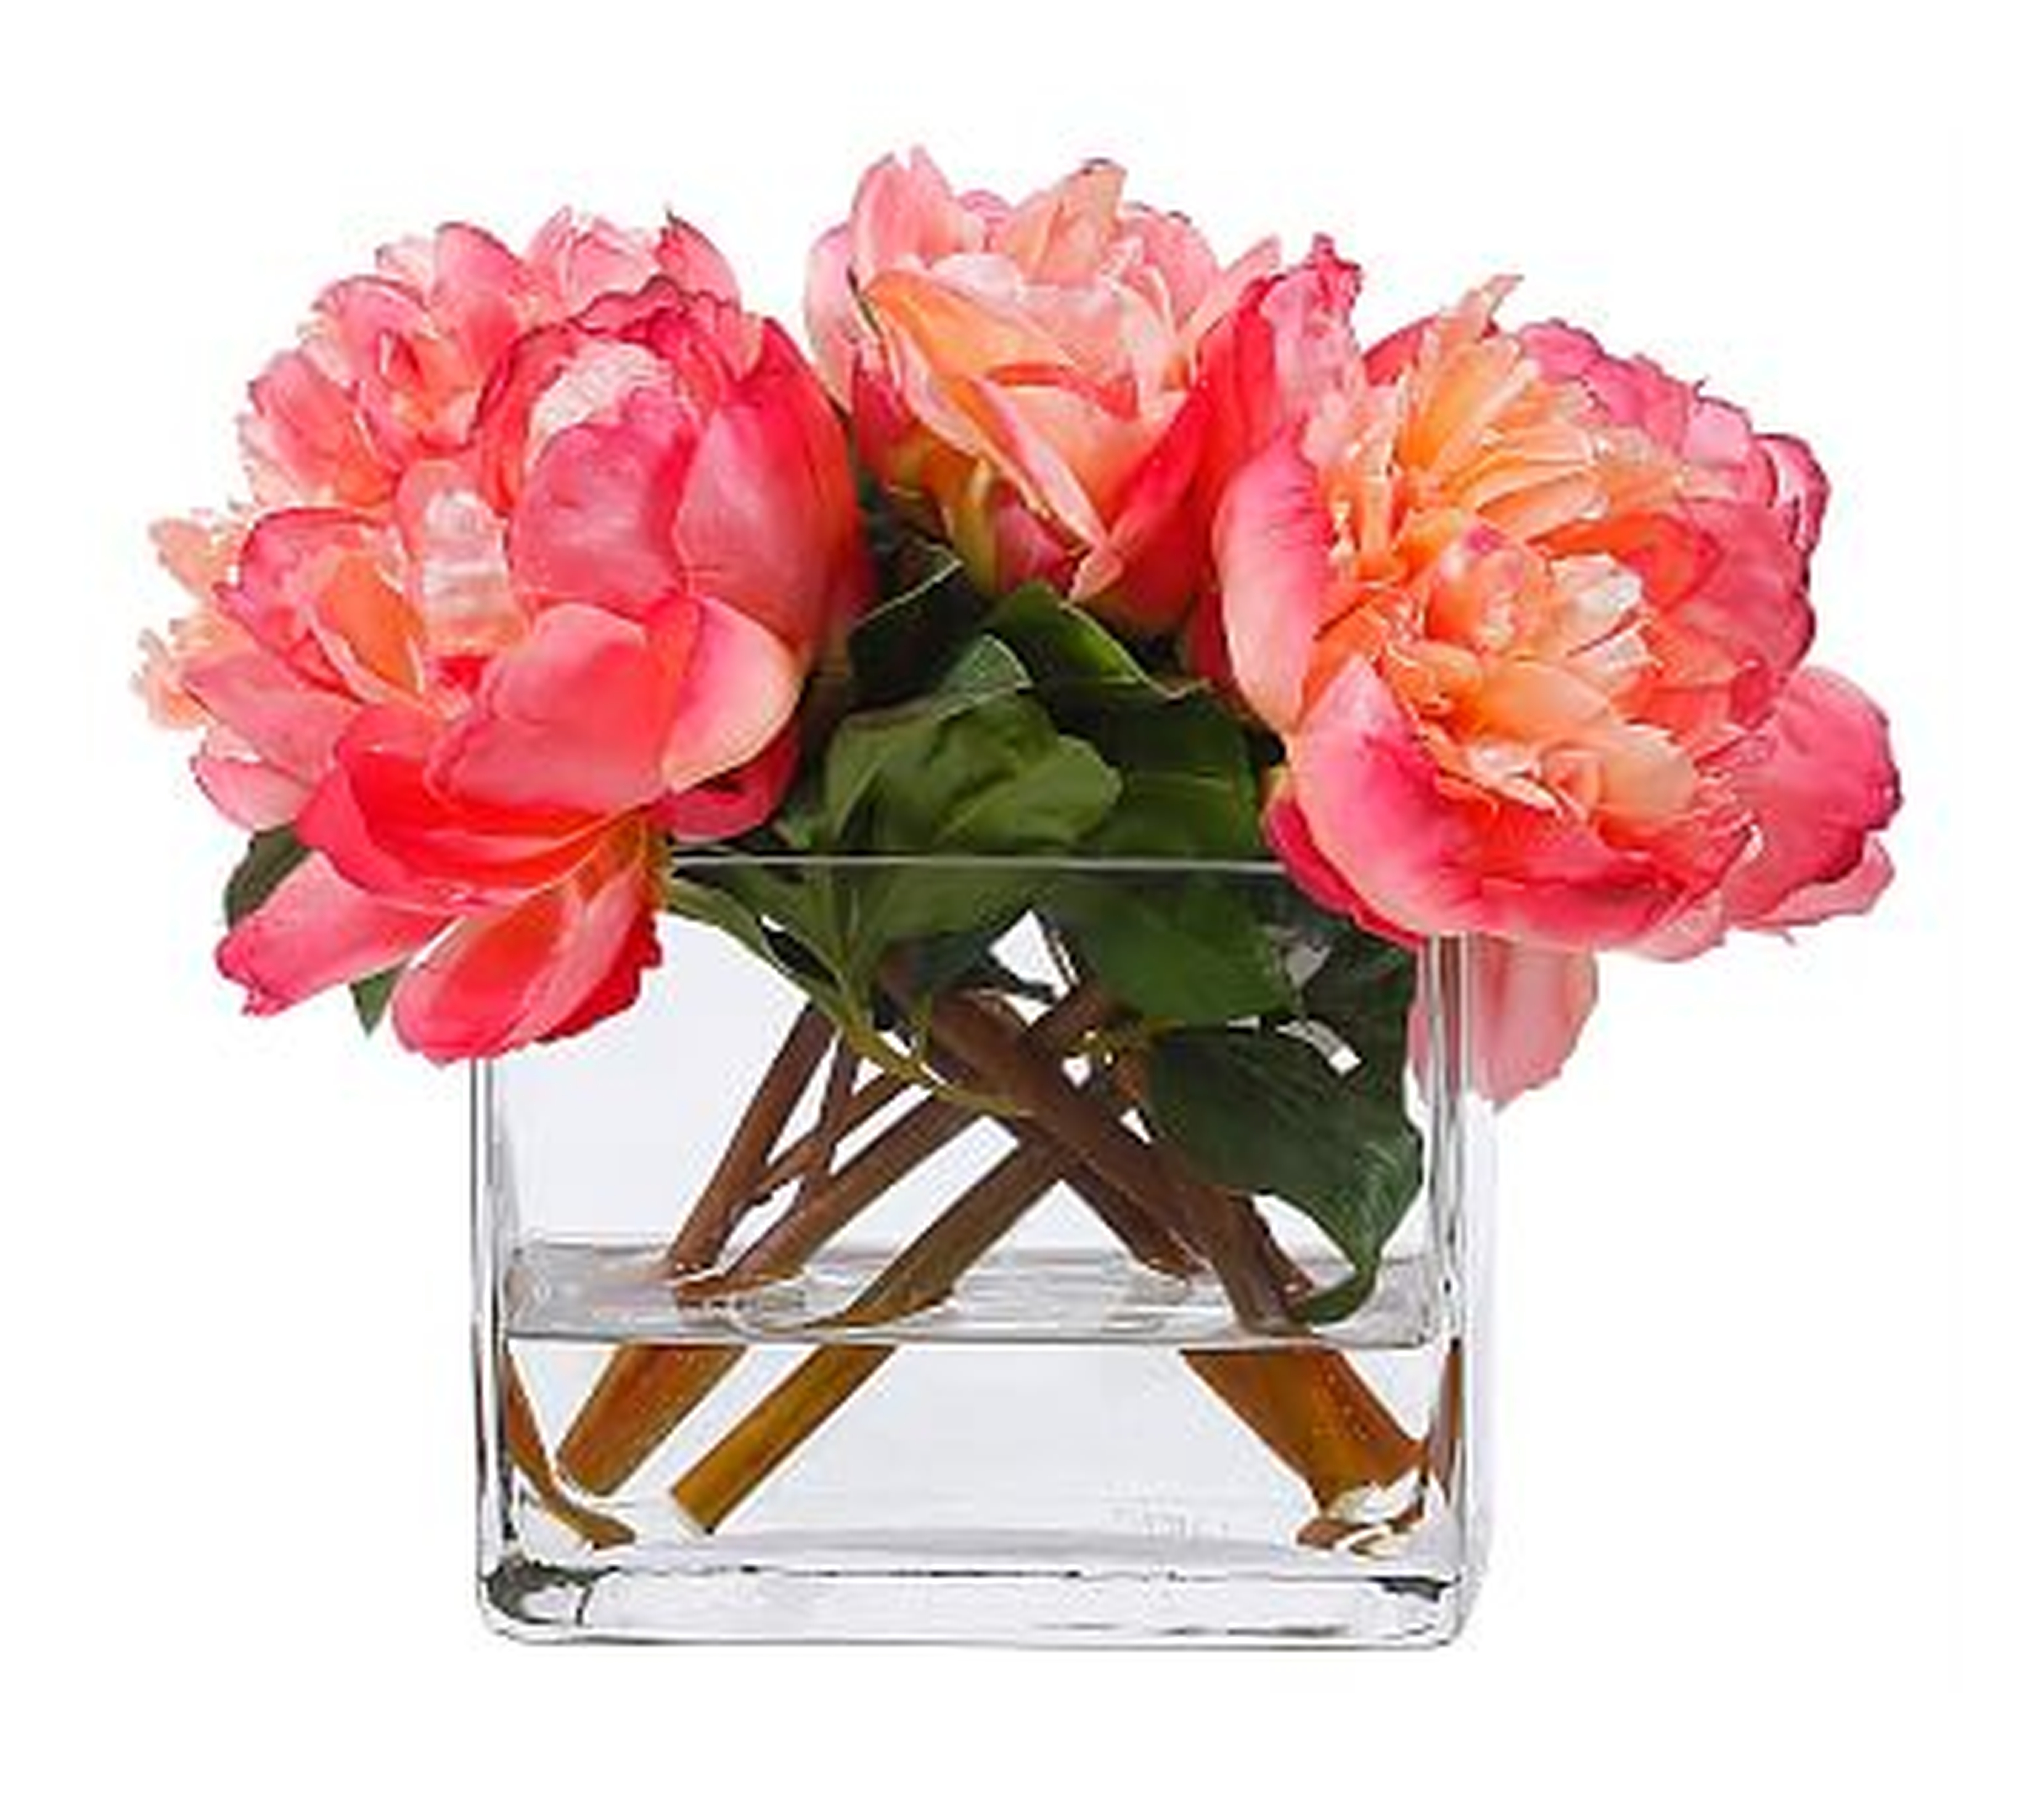 Faux Peonies Arrangement in Square Vase - Pottery Barn